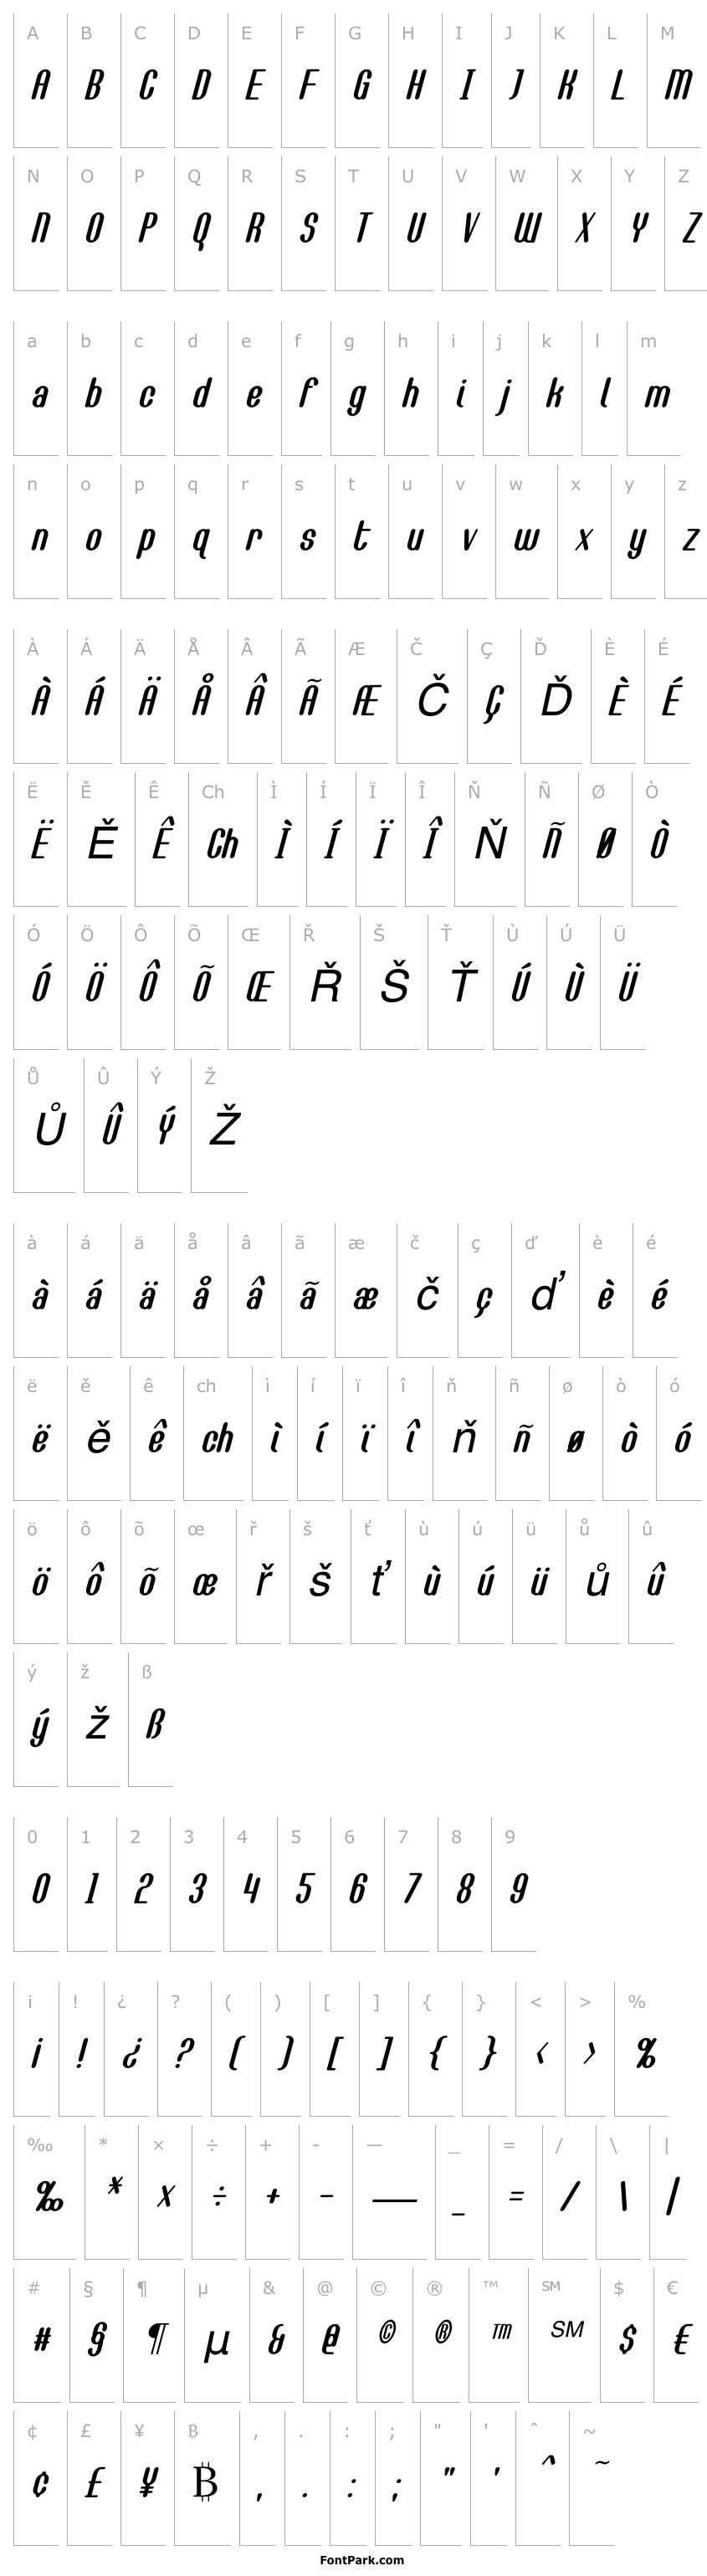 Overview Callie-Mae Italic